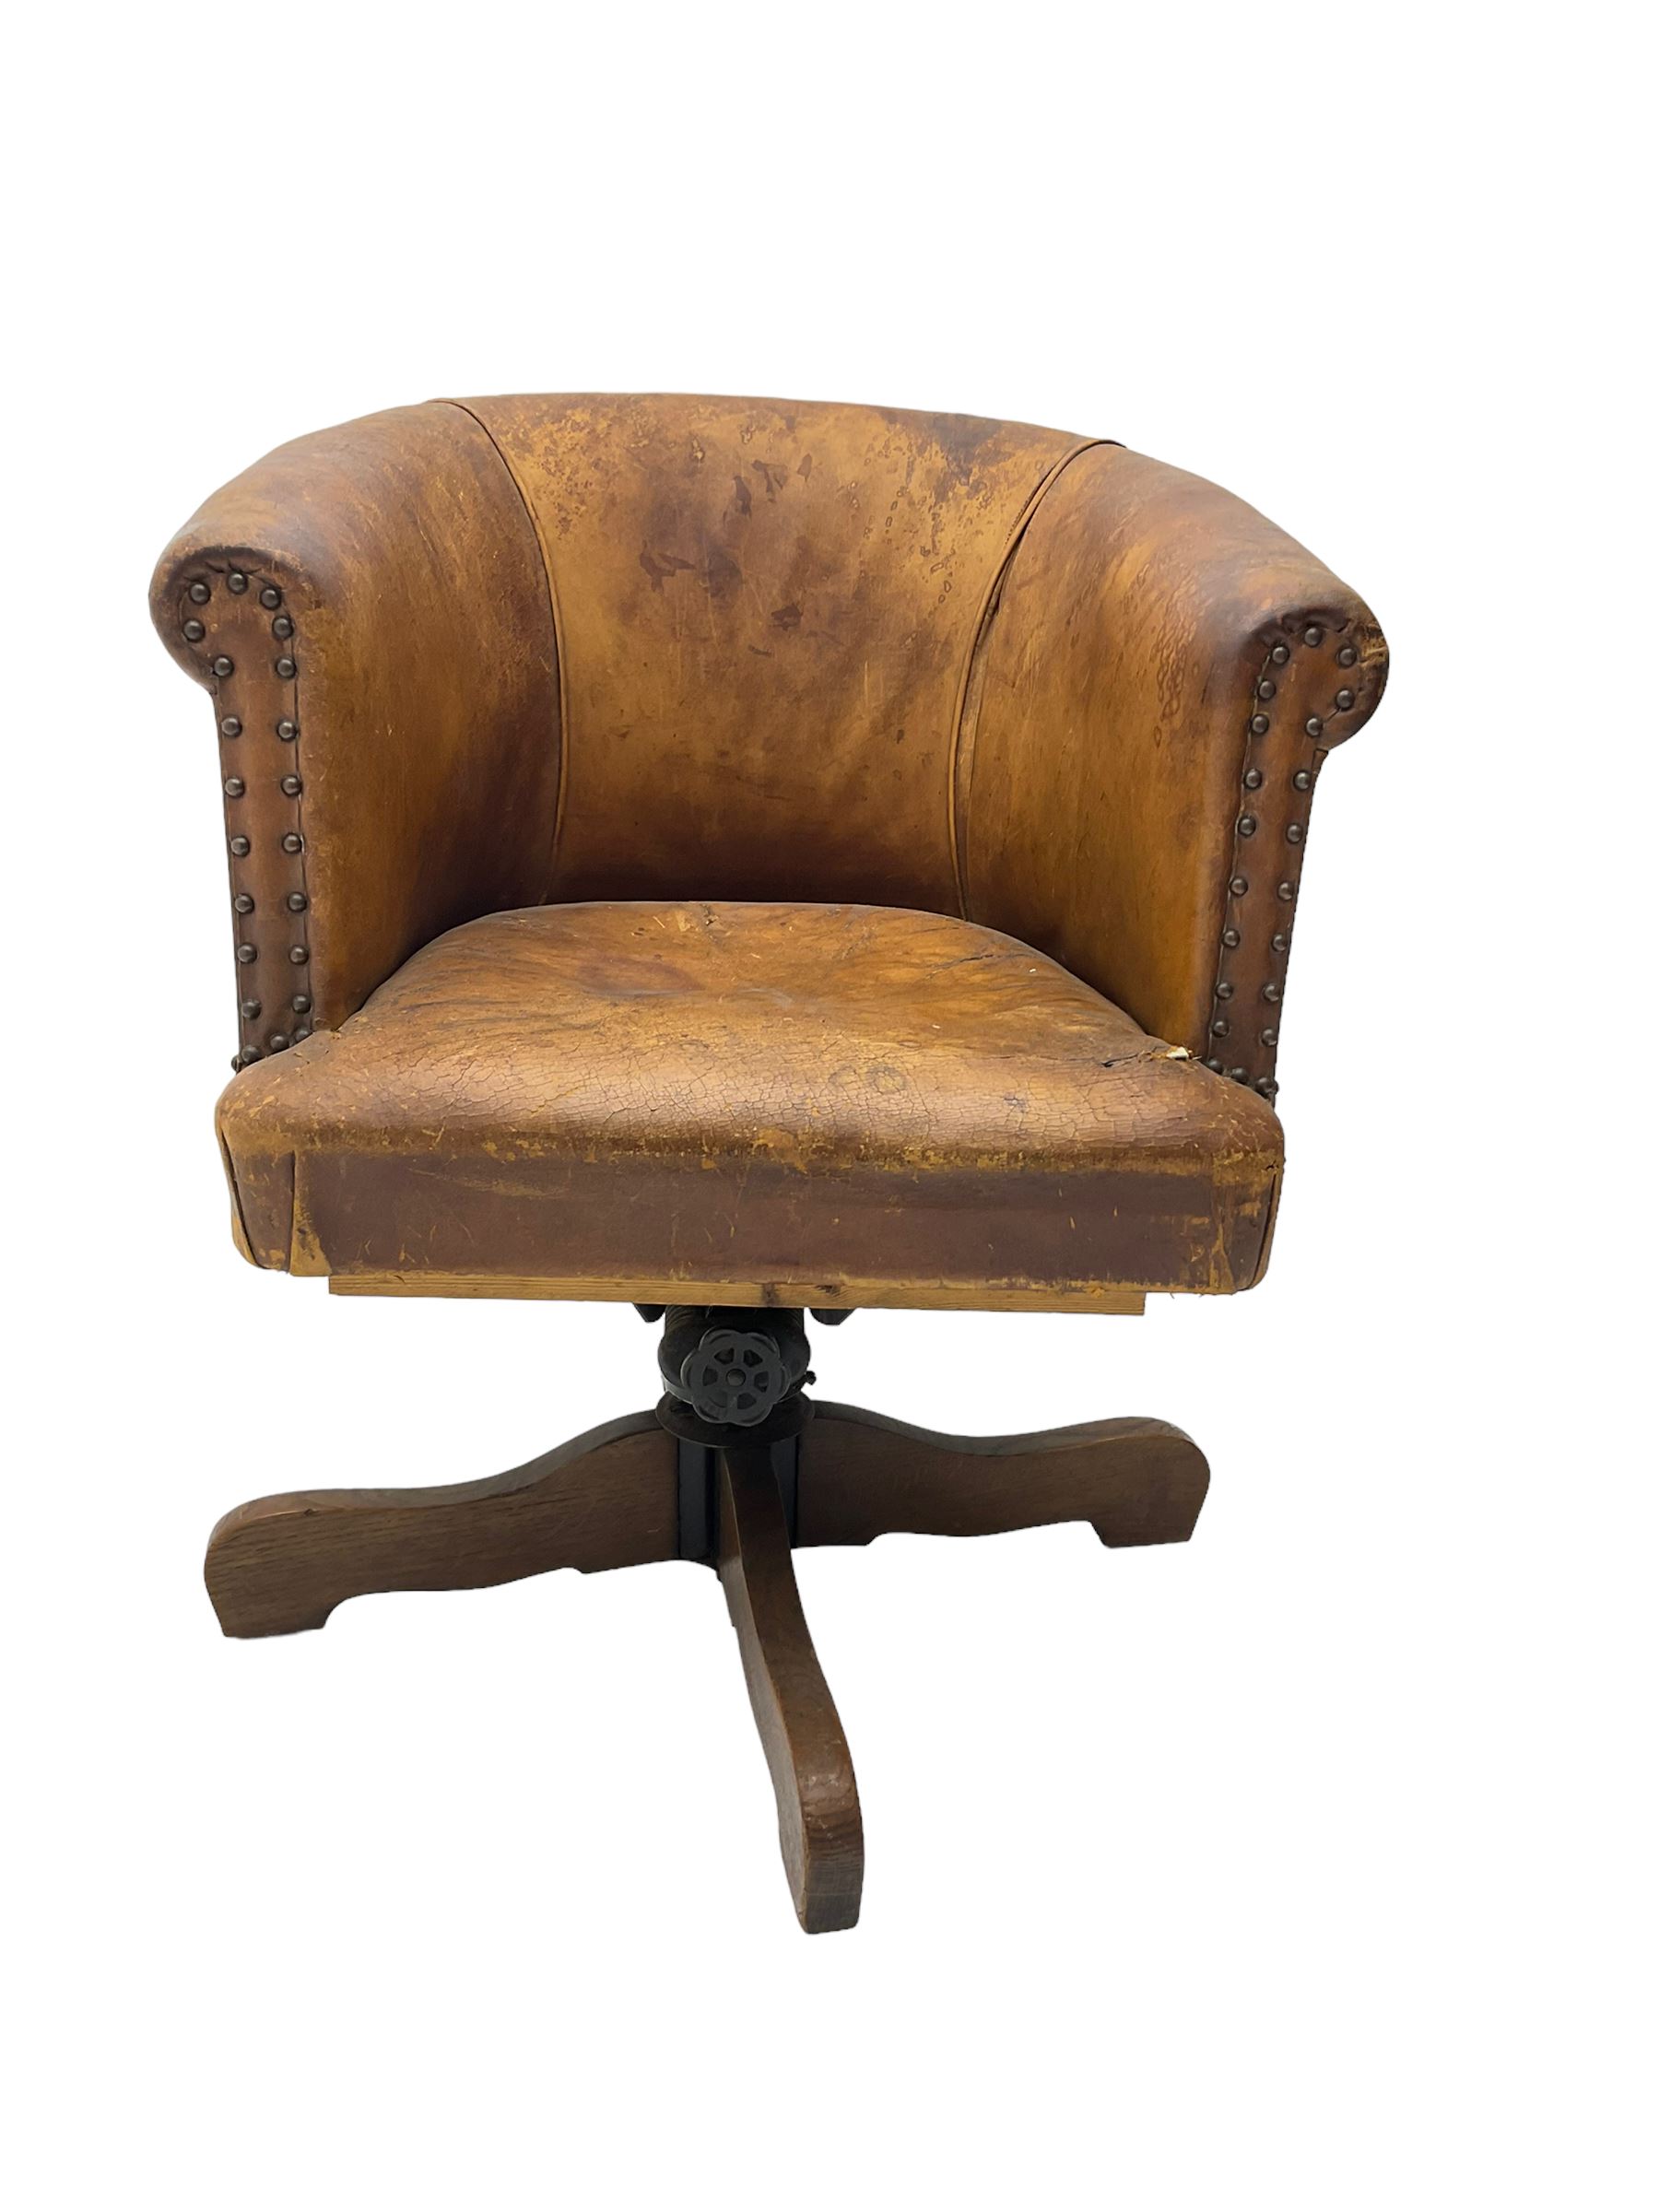 Early 20th century tub swivel armchair - Image 2 of 2